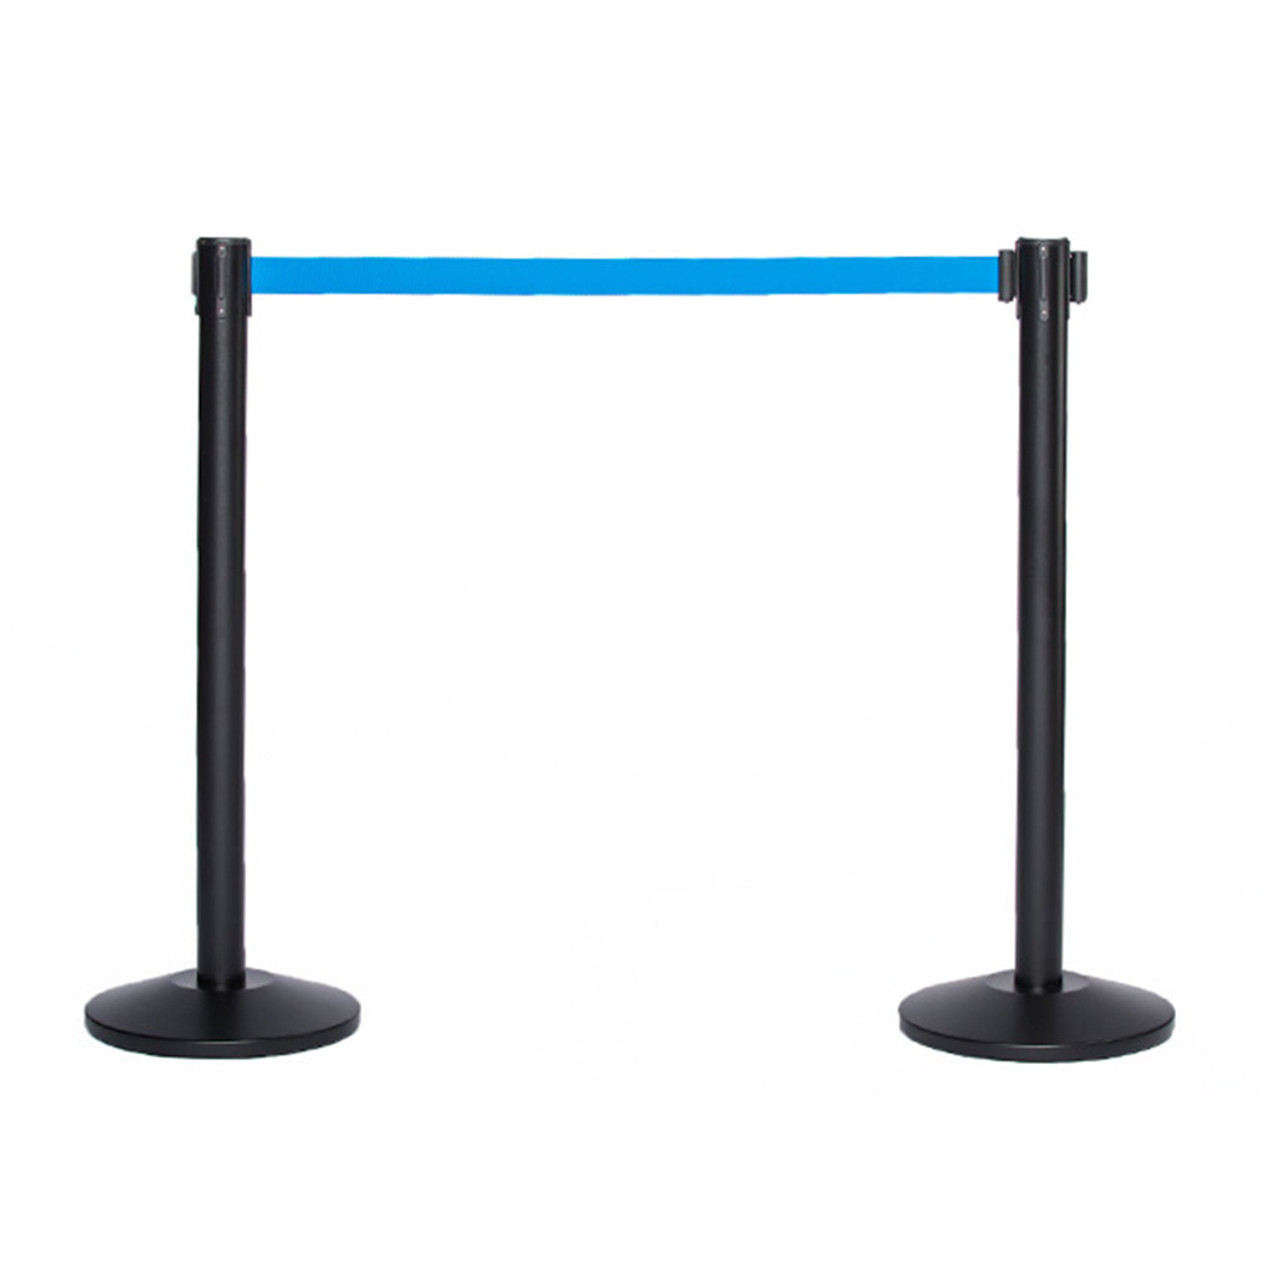 Top Selling Pair of Black Retractable Belt Stanchions with a 10' Light Blue Belt